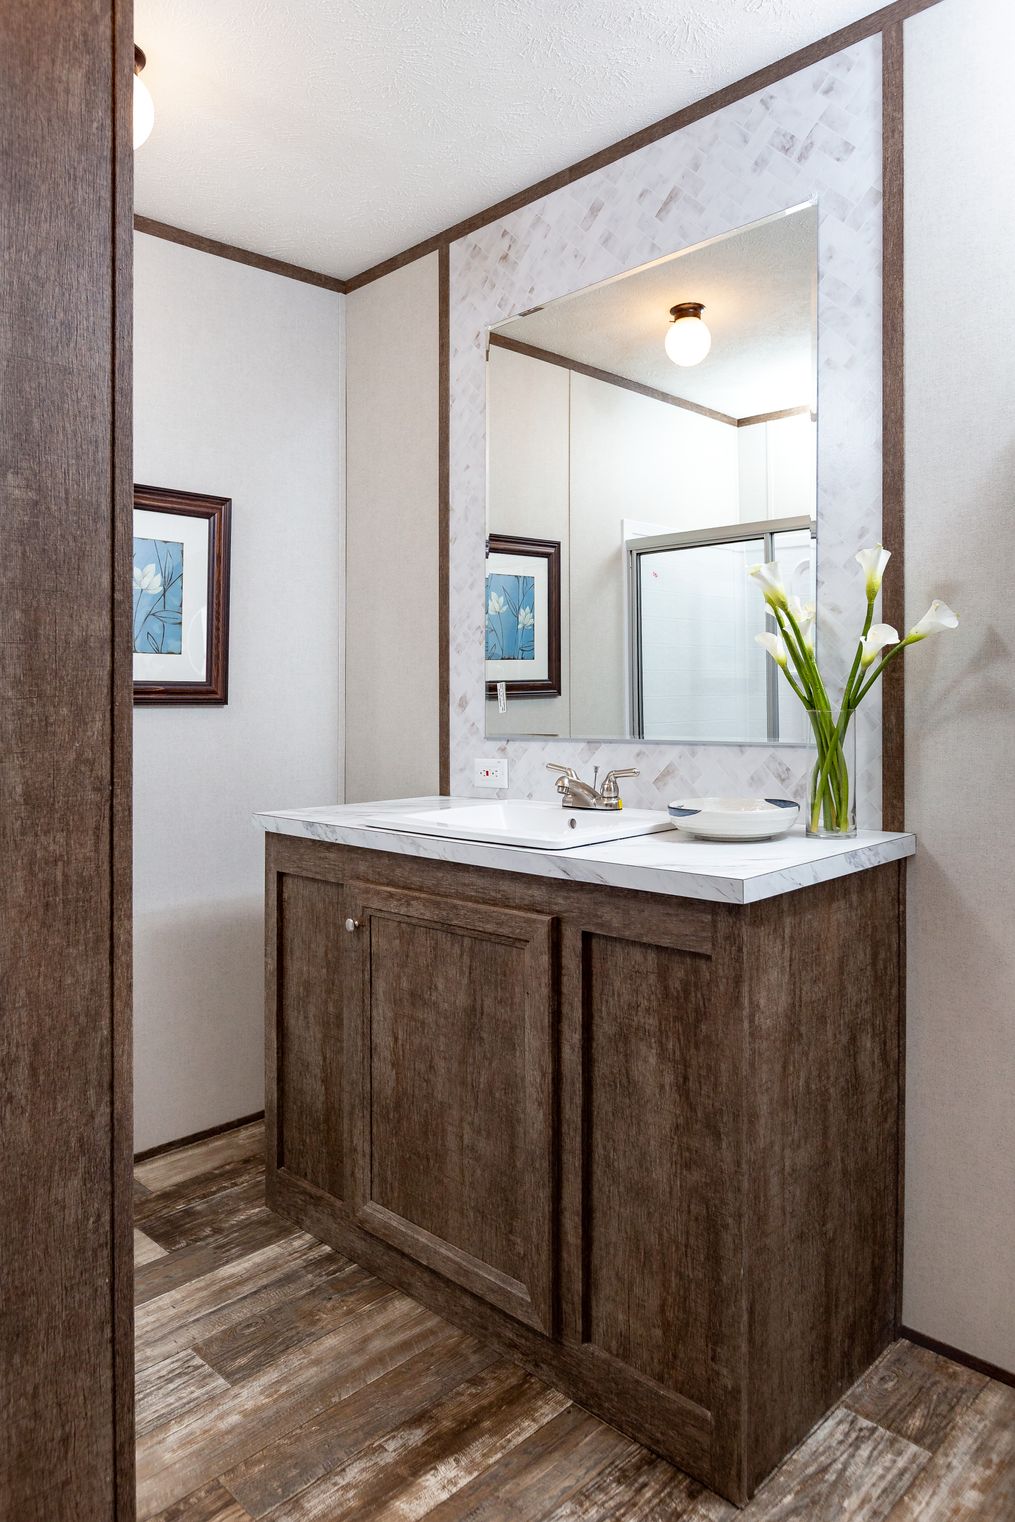 The MAYNARDVILLE CLASSIC 76 Master Bathroom. This Manufactured Mobile Home features 3 bedrooms and 2 baths.